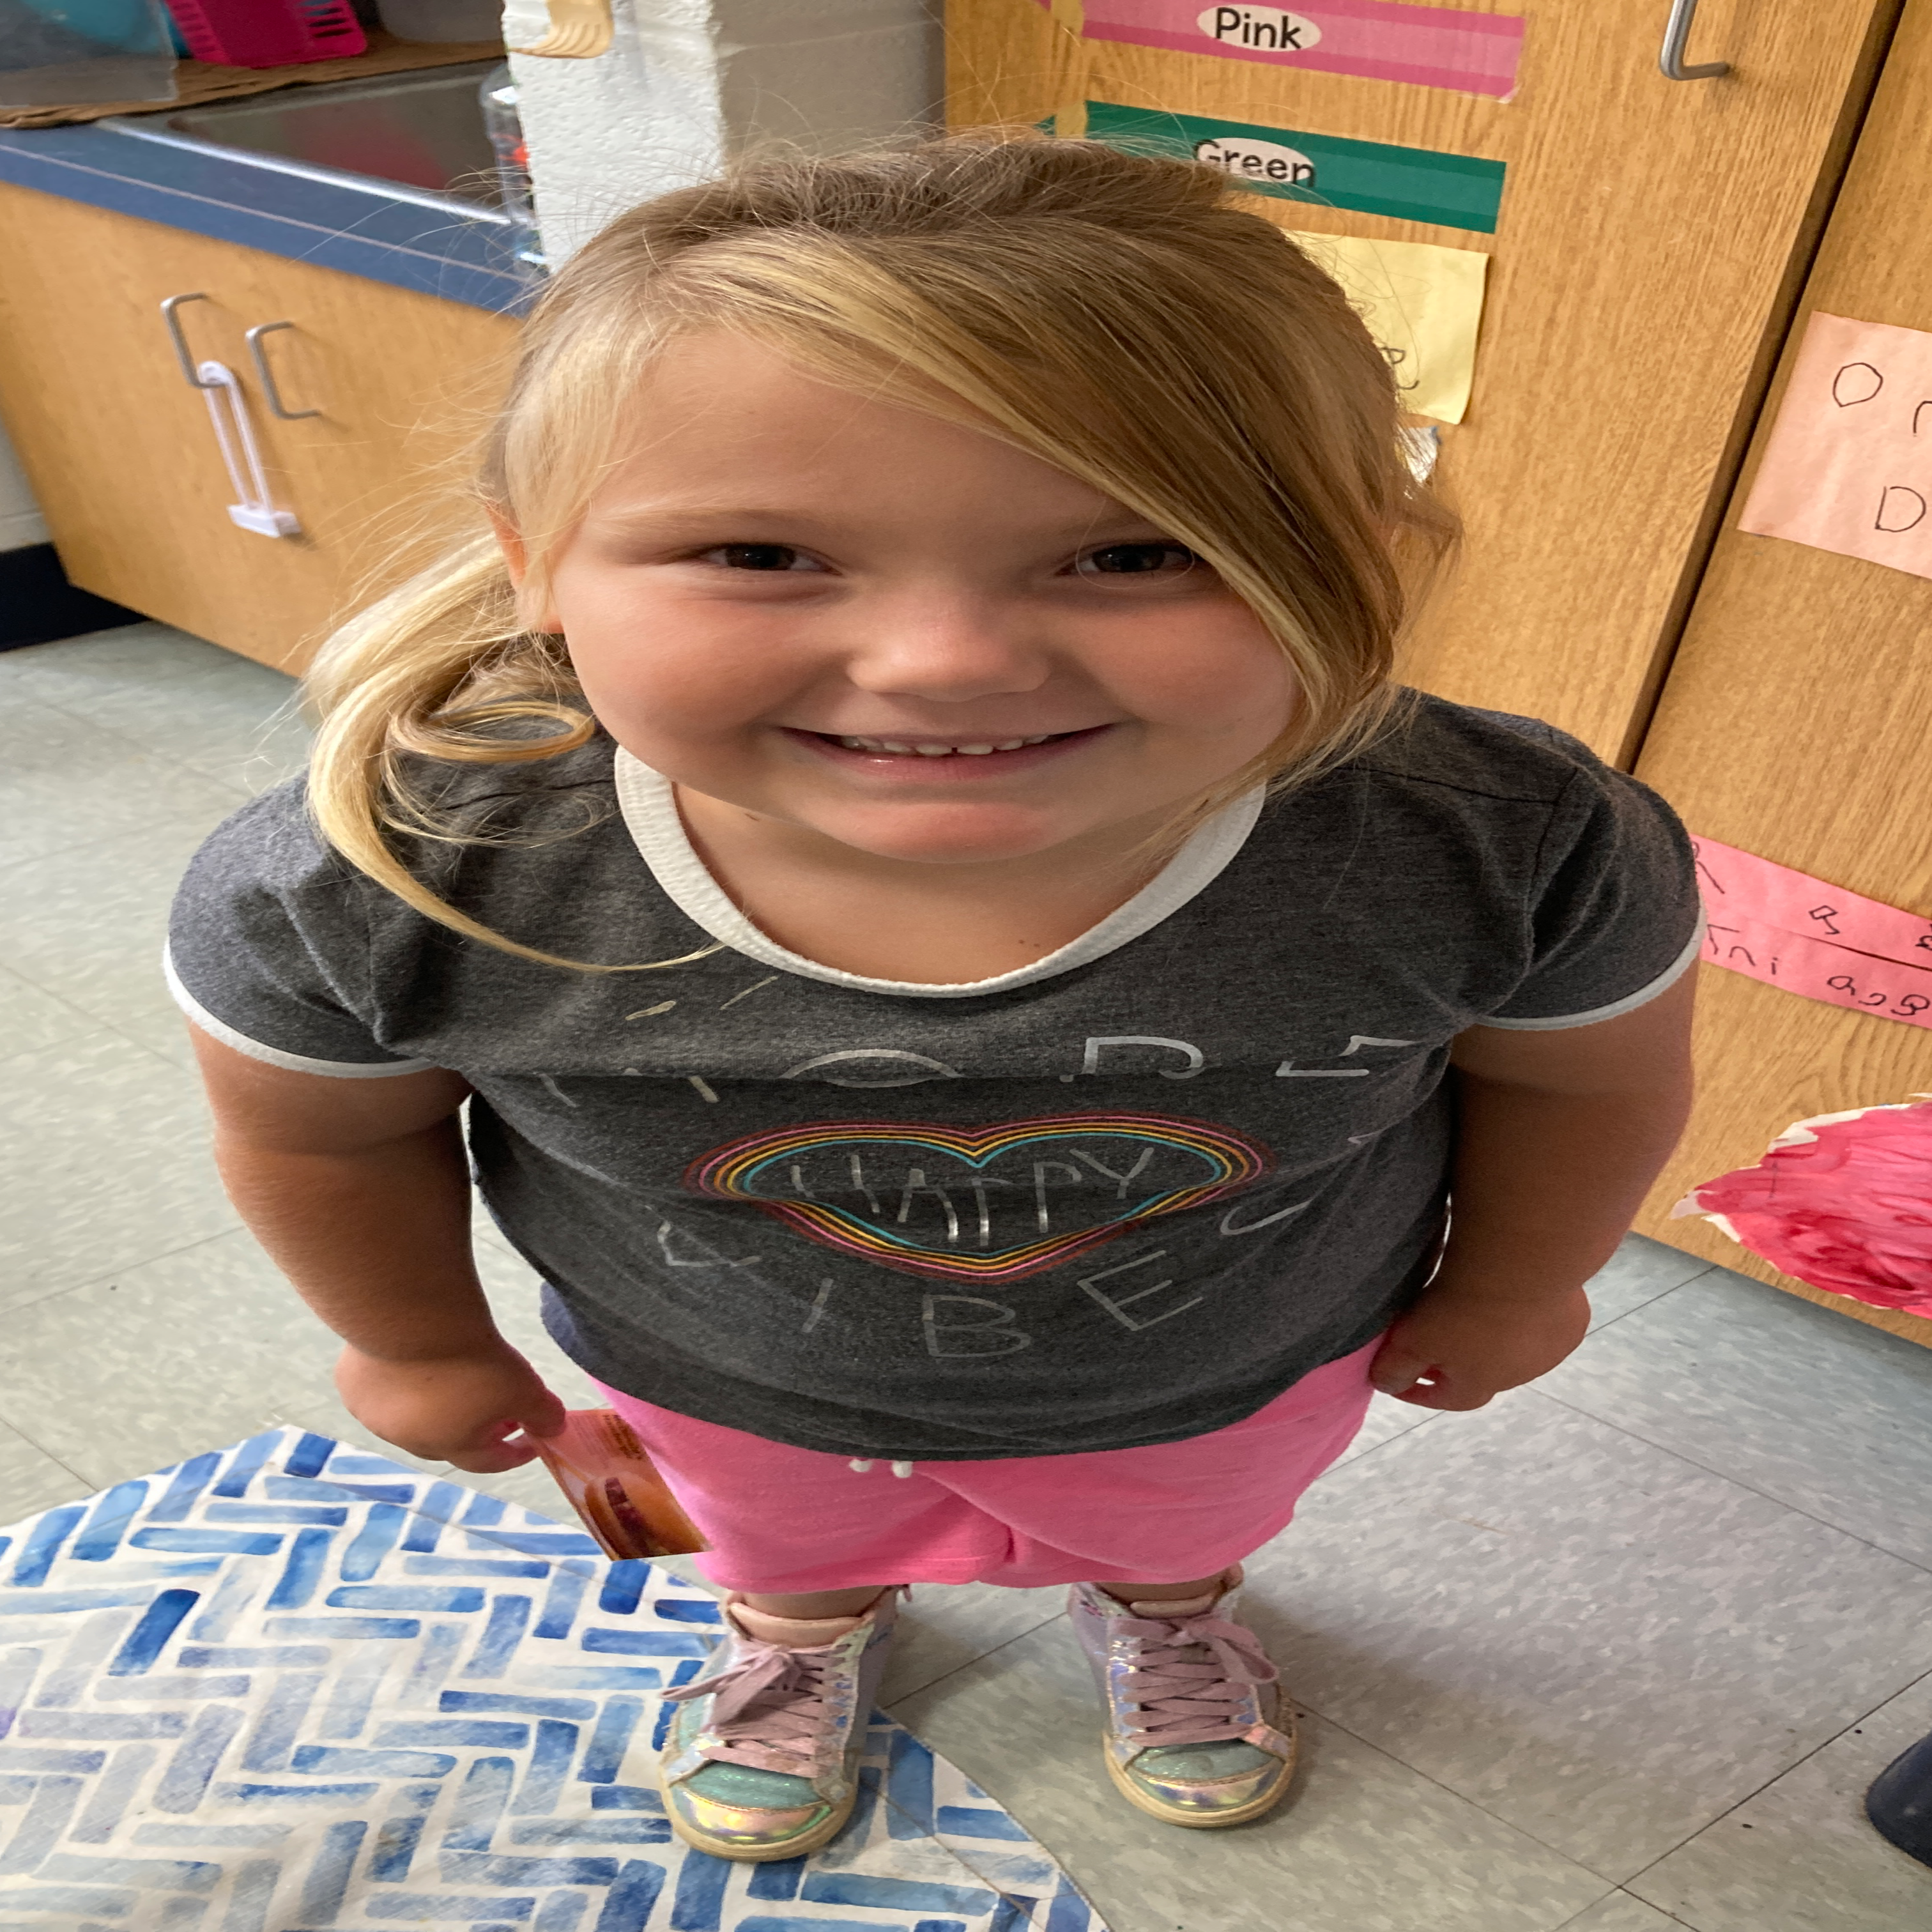 grinning girl with very blonde hair wearing a rainbow heart shirt